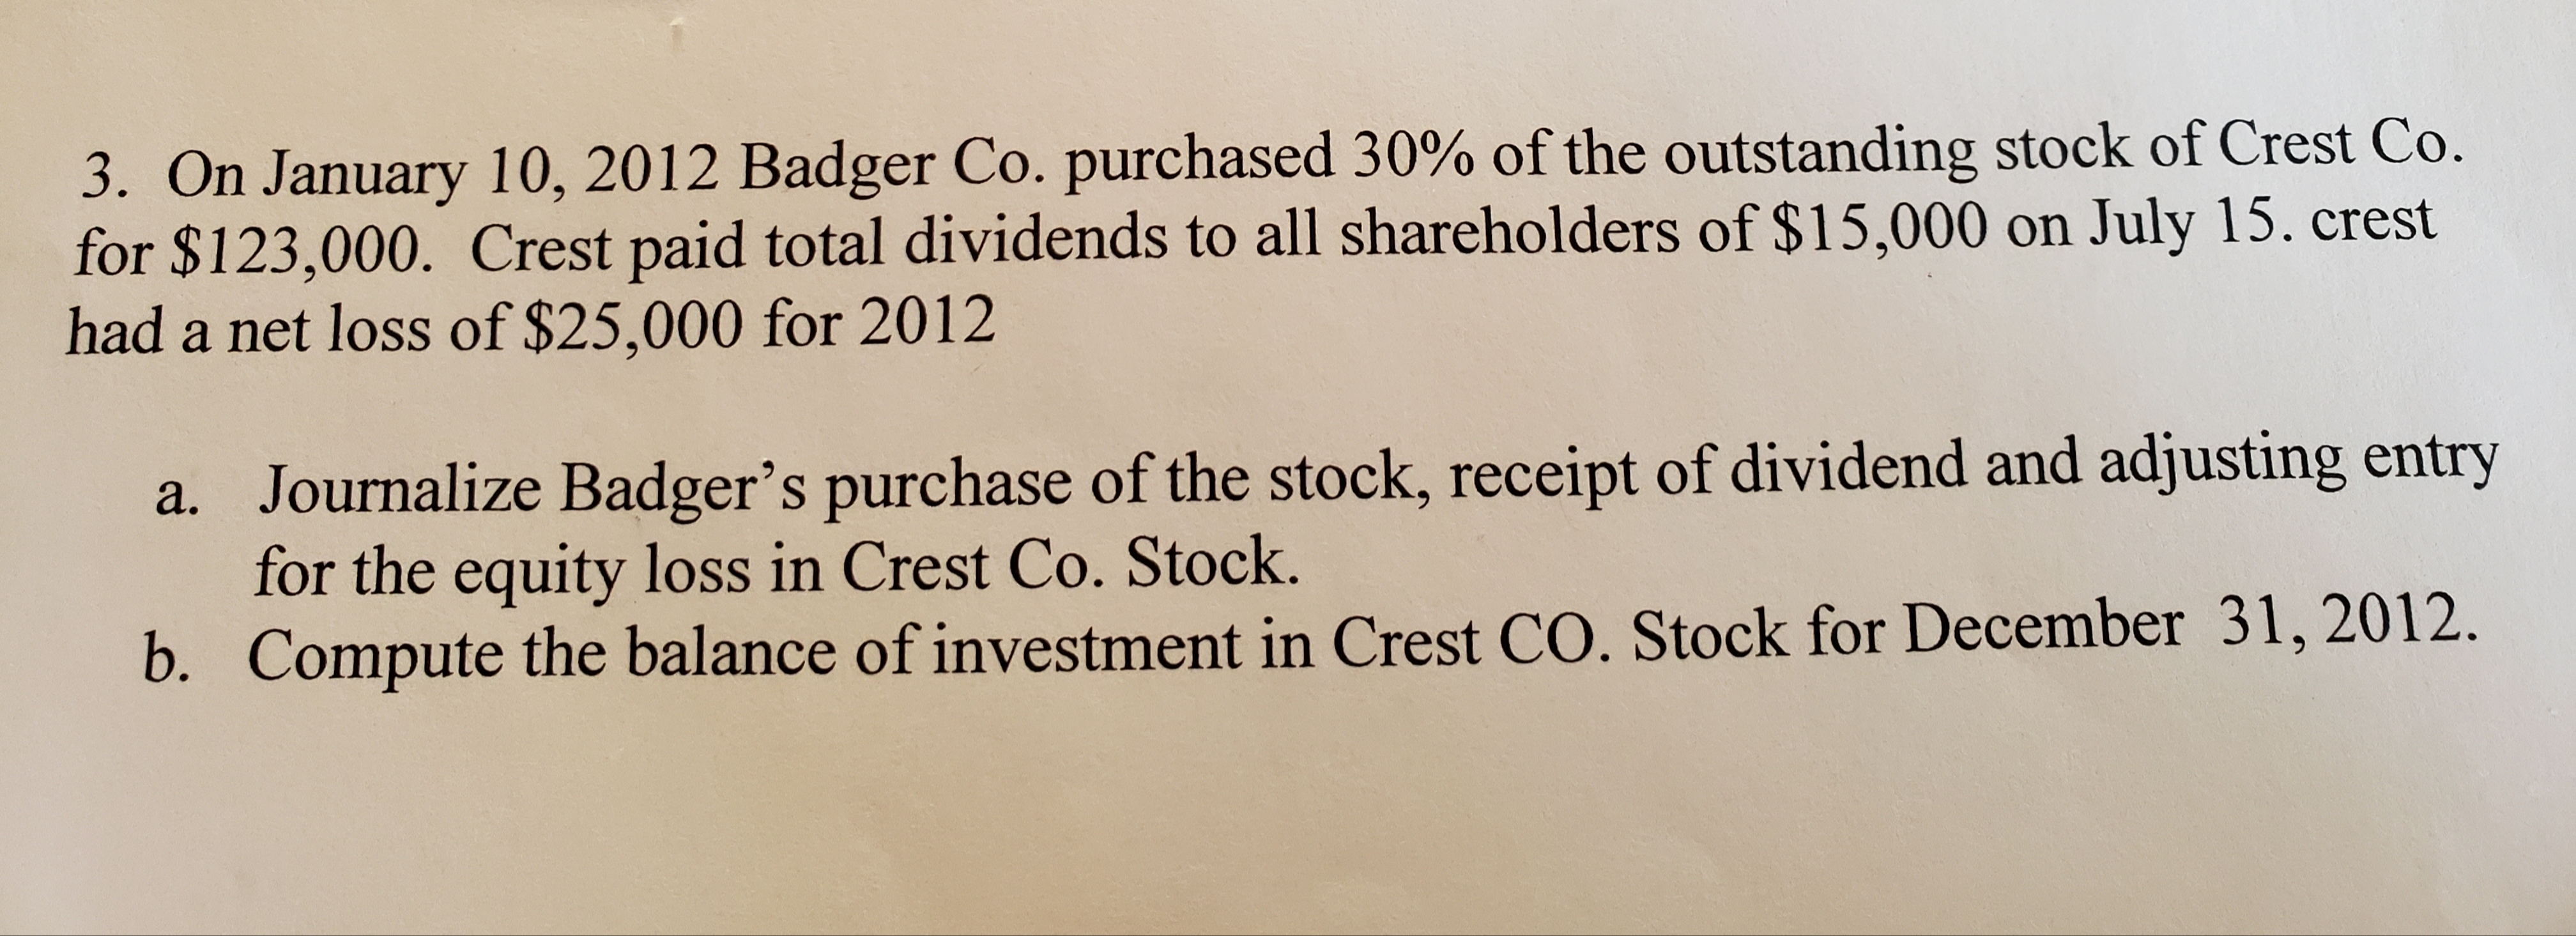 3. On January 10, 2012 Badger Co. purchased 30% of the outstanding stock of Crest Co.
for $123,000. Crest paid total dividends to all shareholders of $15,000 on July 15. crest
had a net loss of $25,000 for 2012
a. Journalize Badger's purchase of the stock, receipt of dividend and adjusting entry
for the equity loss in Crest Co. Stock.
b. Compute the balance of investment in Crest CO. Stock for December 31, 2012.
